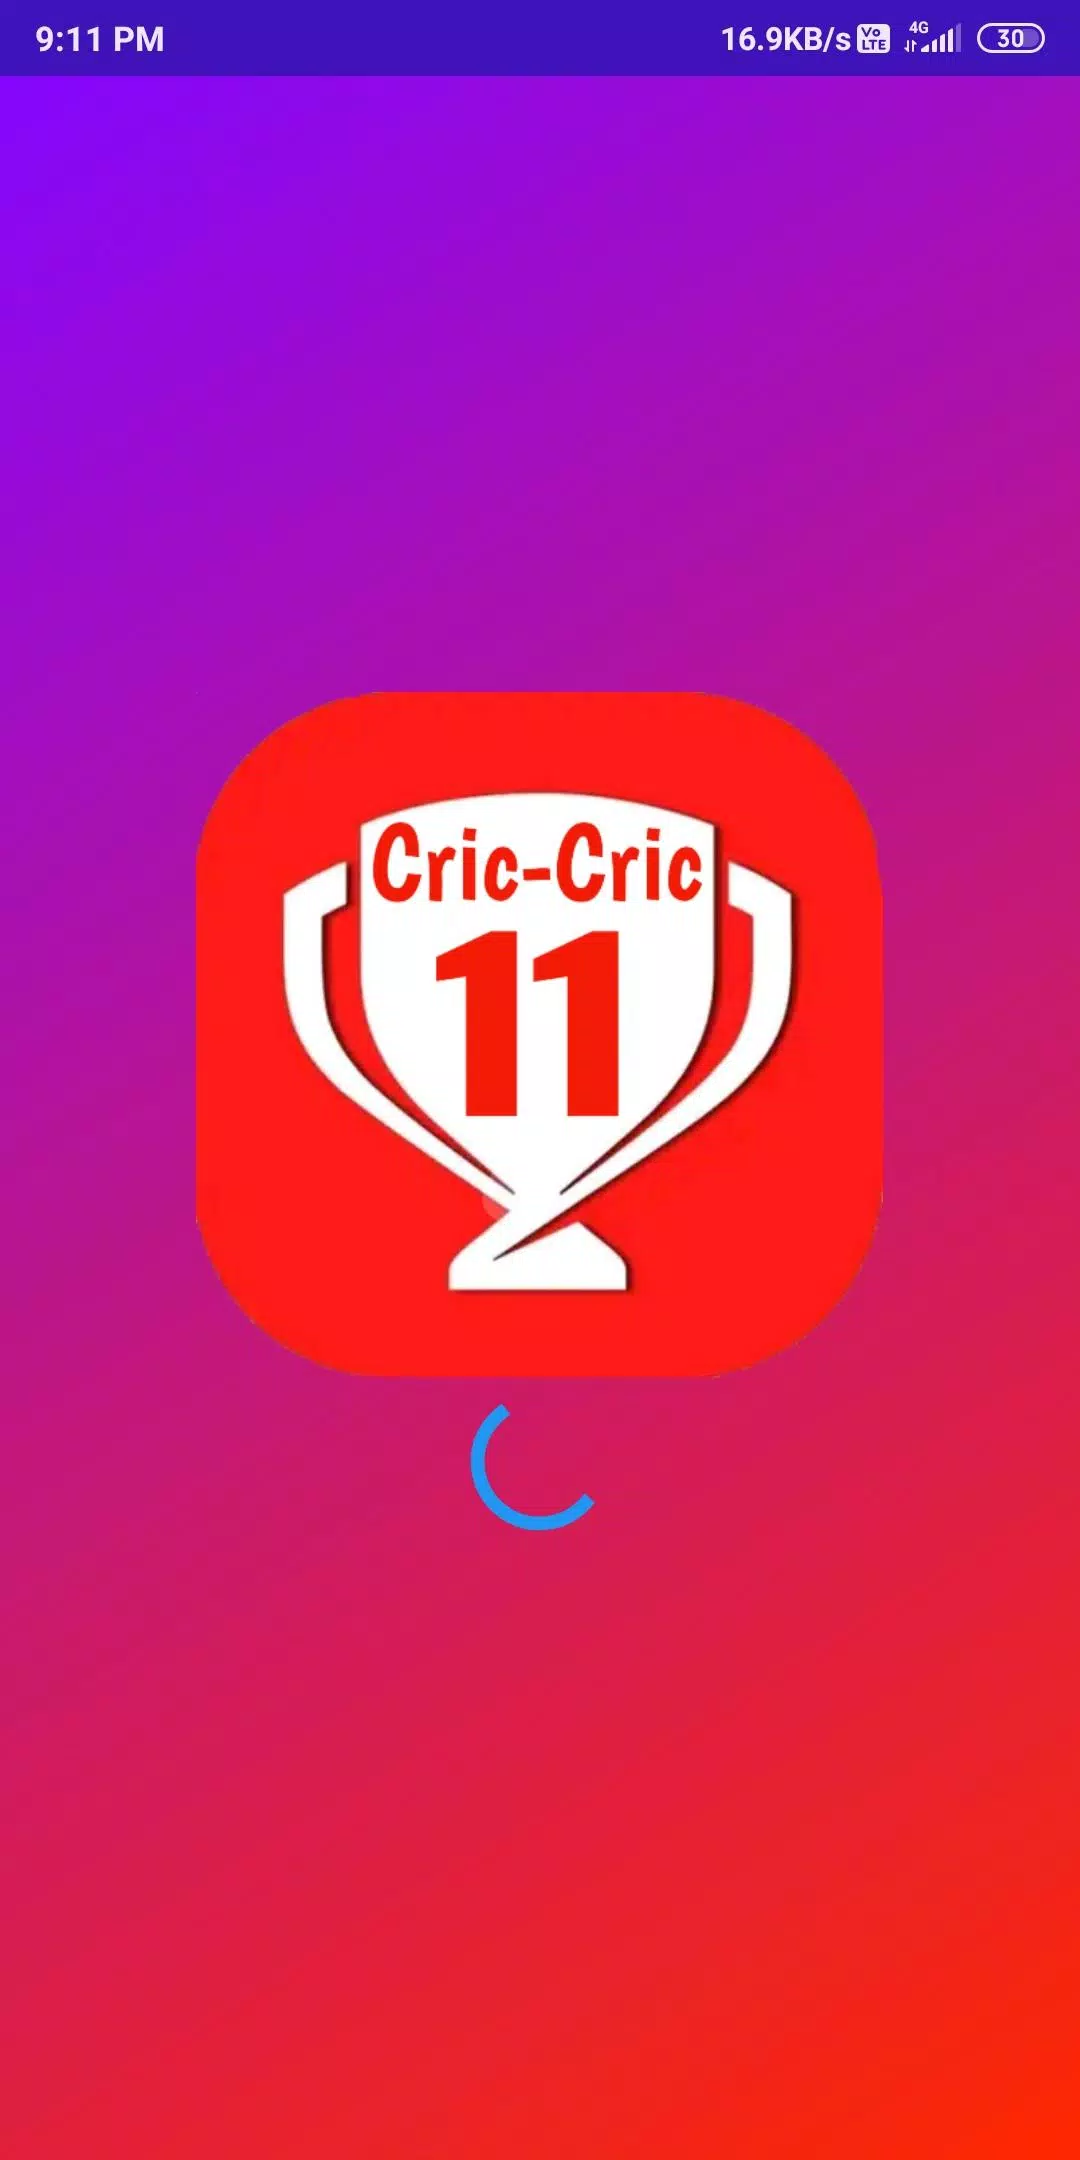 Cric-Cric 11 - Expert Predictions & Tips for Android - APK Download